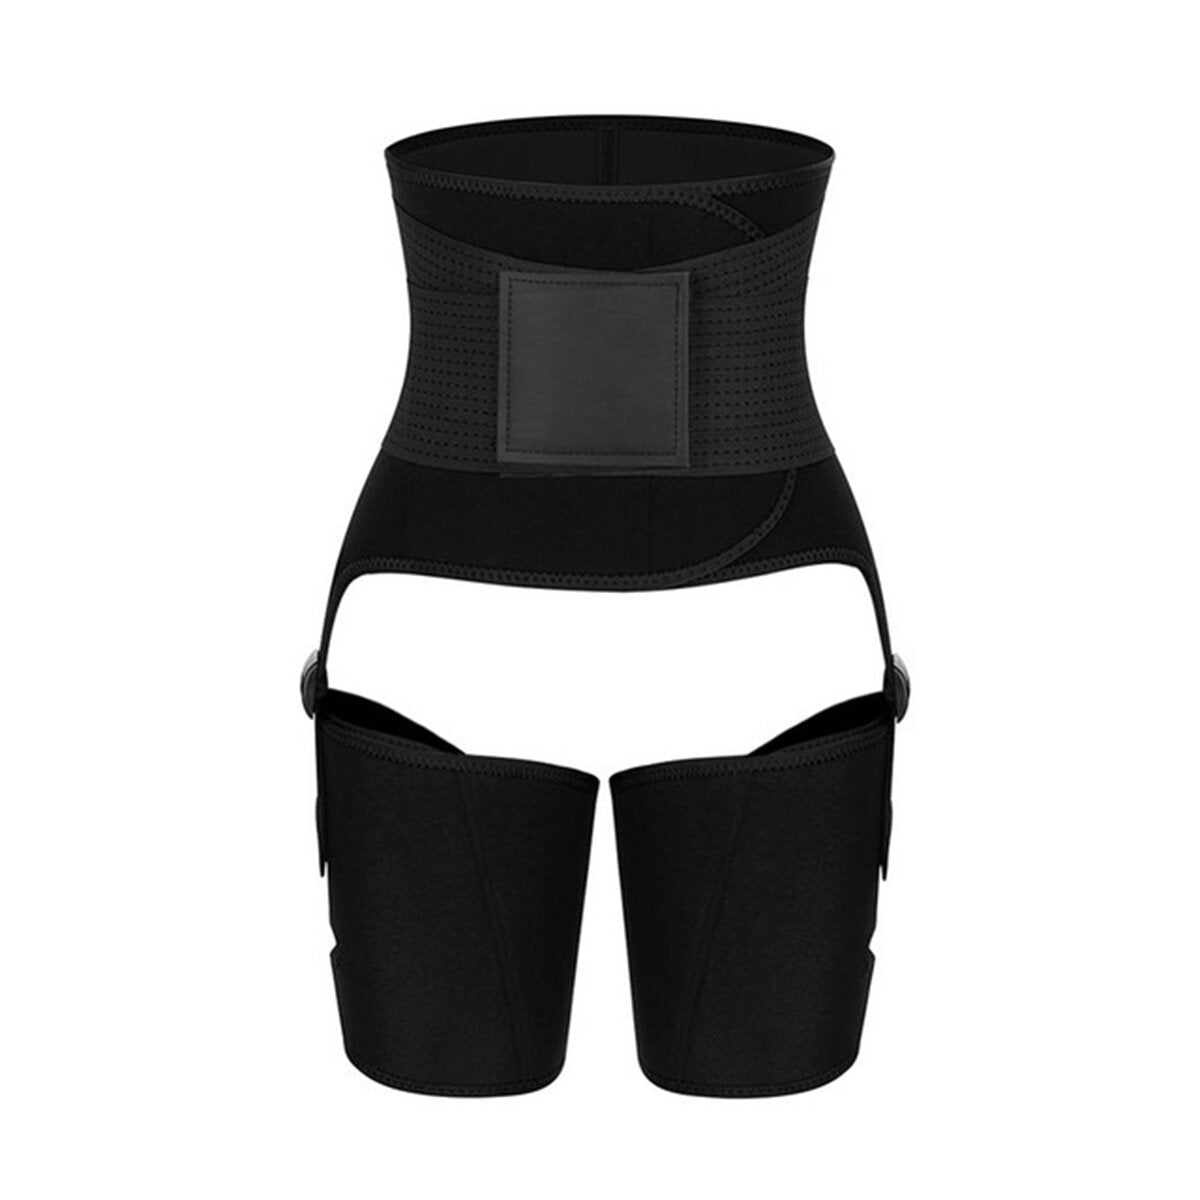 3-IN-1 Waist Training Belt Body Shaping Sauna Elbow Pads Waistband Corset Leg Hip Thigh Trainer Trimmer Home Fitness Tools